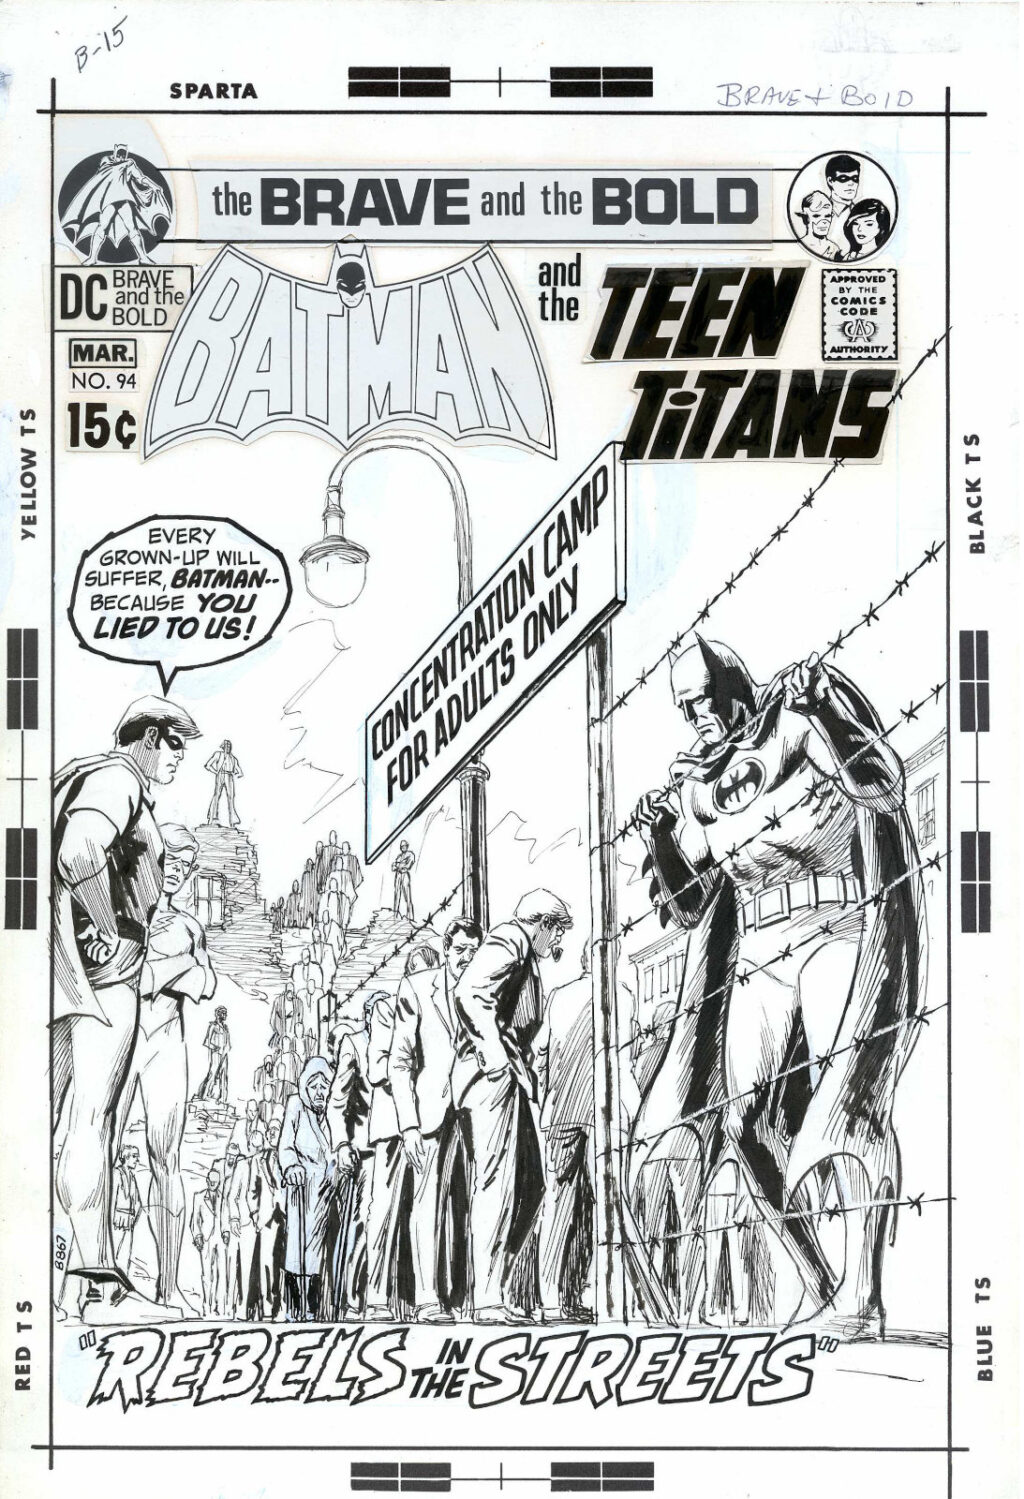 The Brave and the Bold issue 94 cover by Nick Cardy